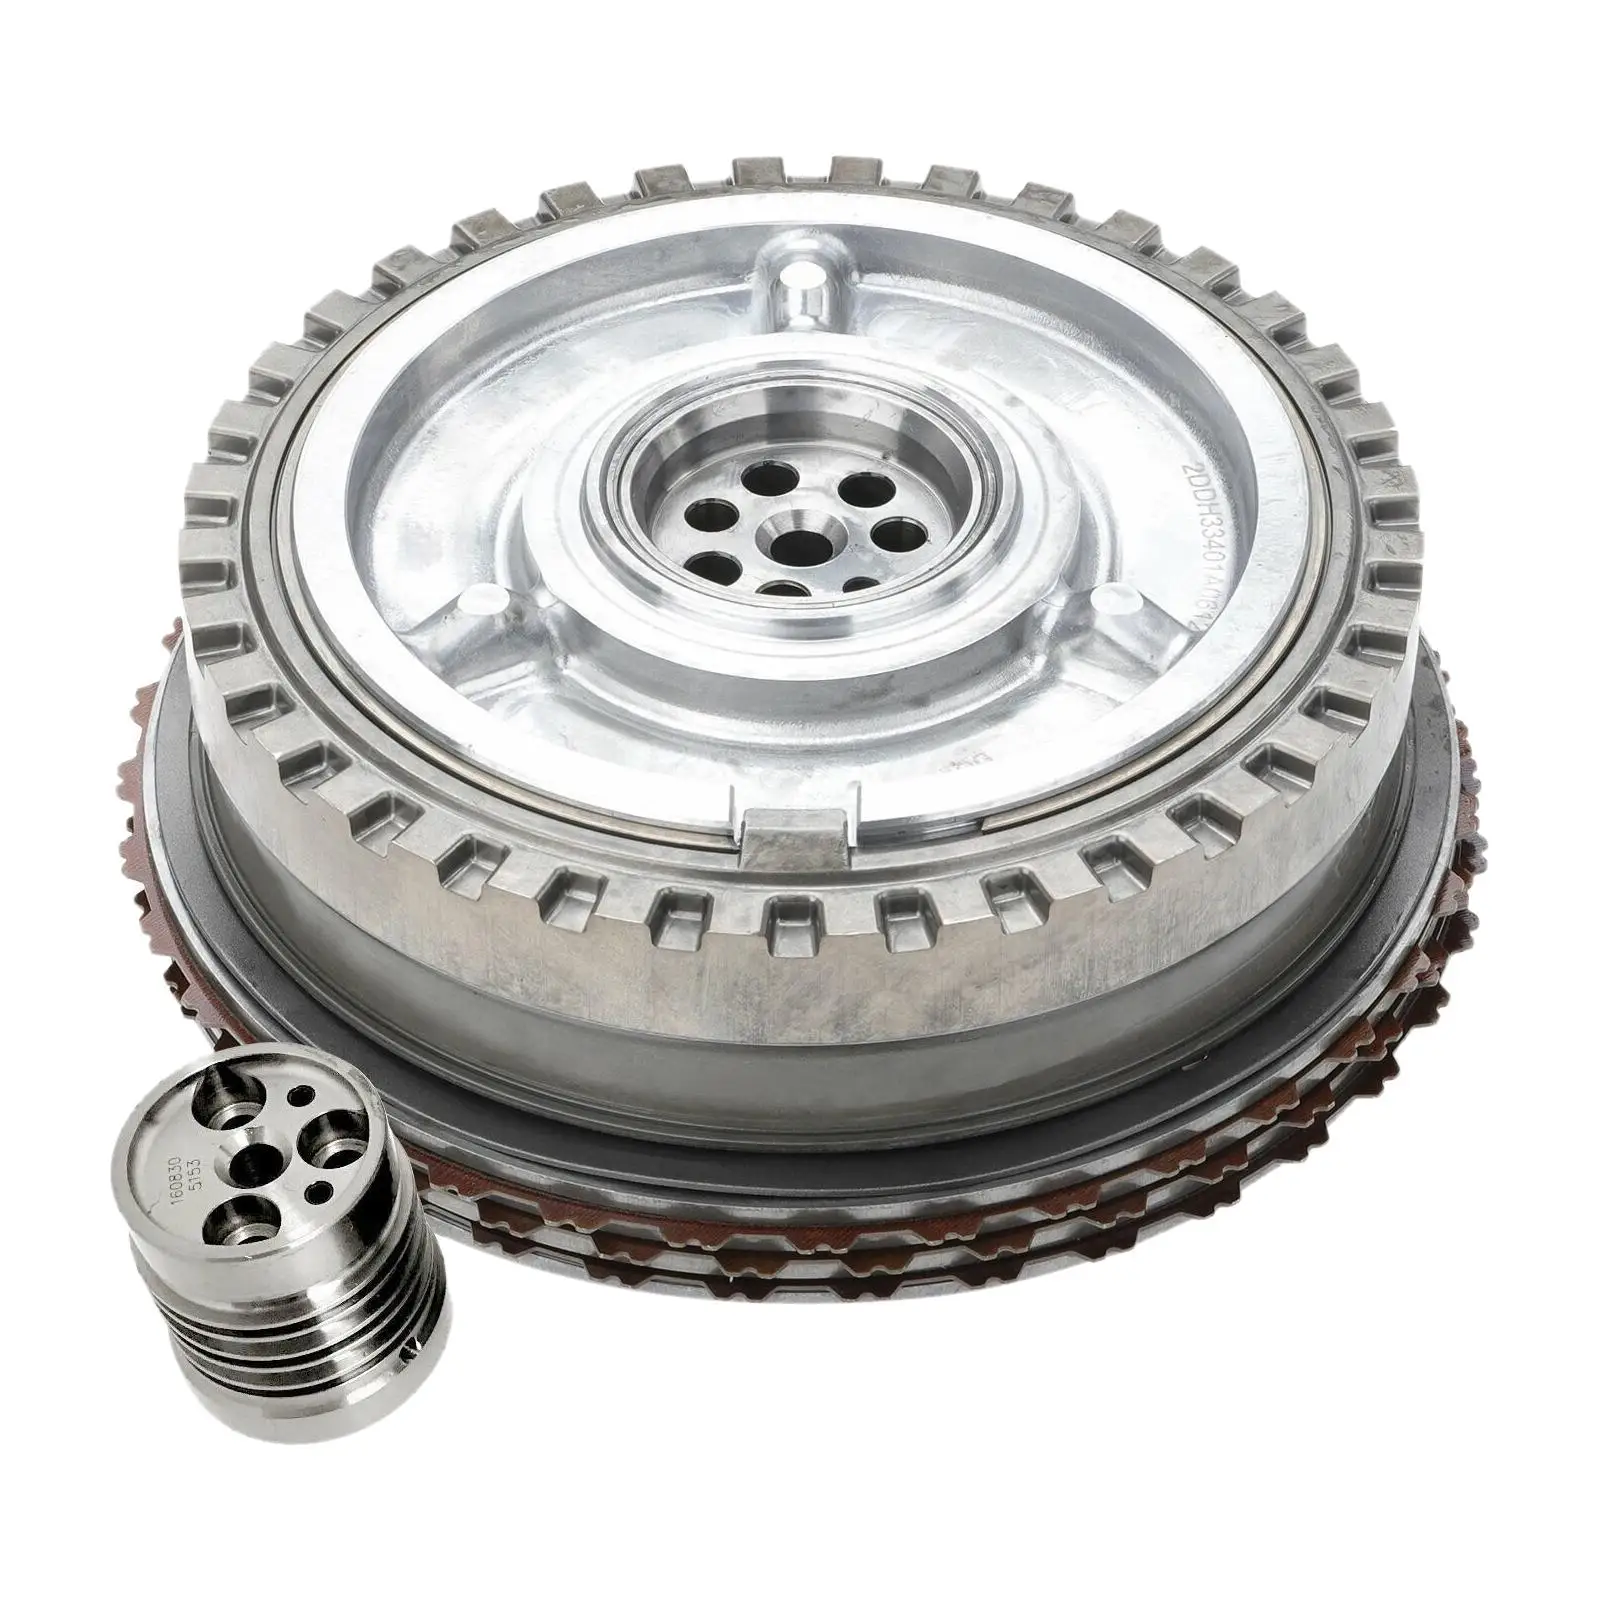 Transmission Clutch Assembly Input Drum/ 6T45E 6T40 6T40E 6T45 6T30E 6T30 Replace/ High Performance